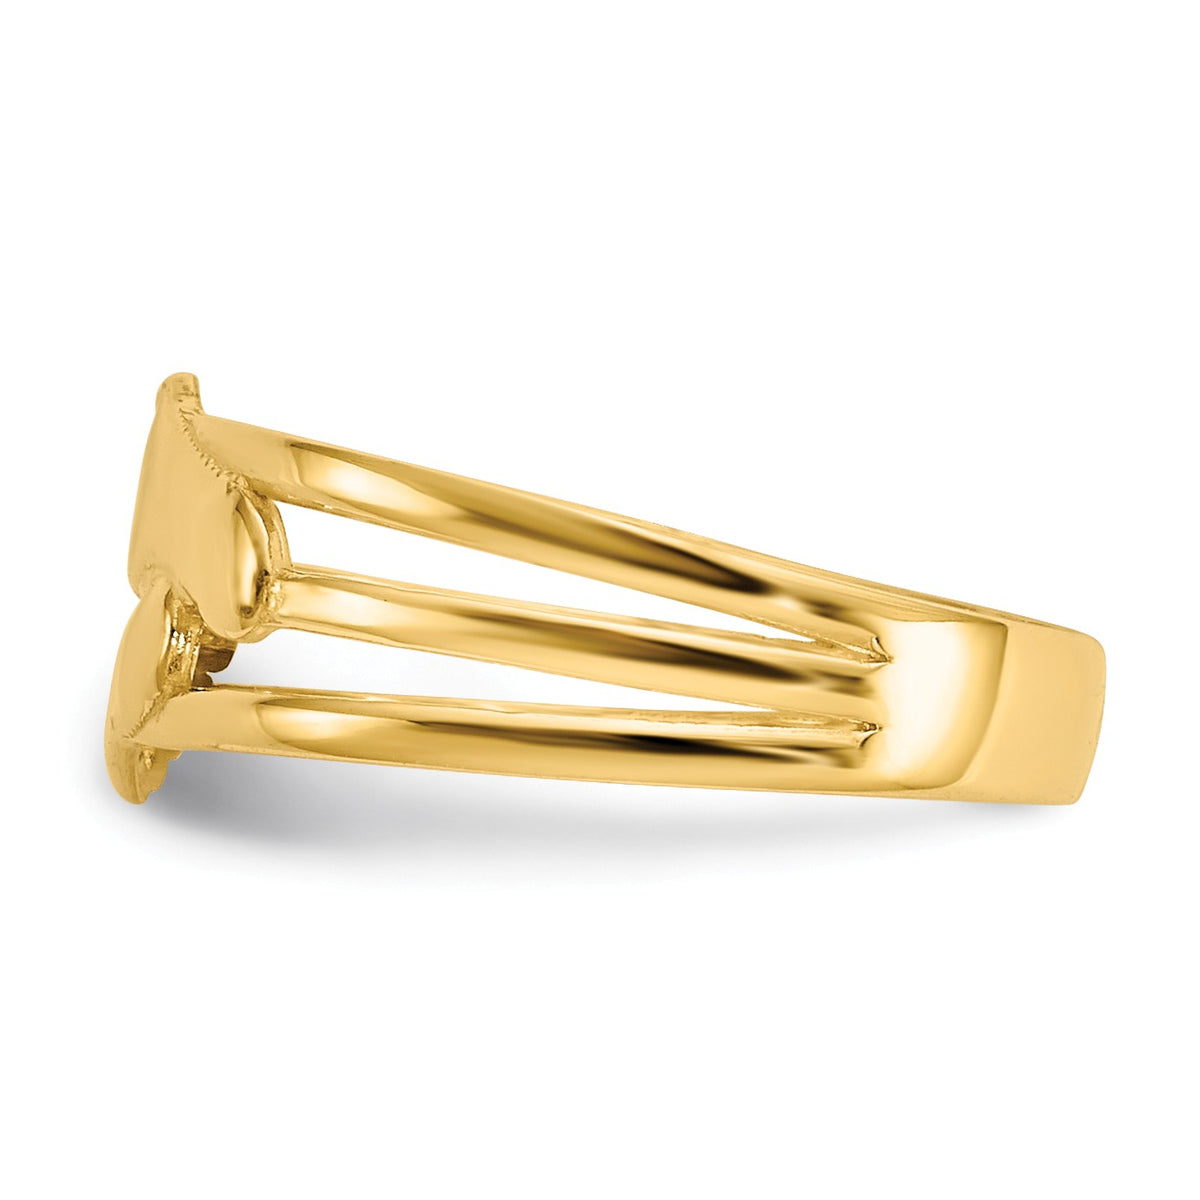 Alternate view of the Bare Feet Toe Ring in 14K Yellow Gold by The Black Bow Jewelry Co.